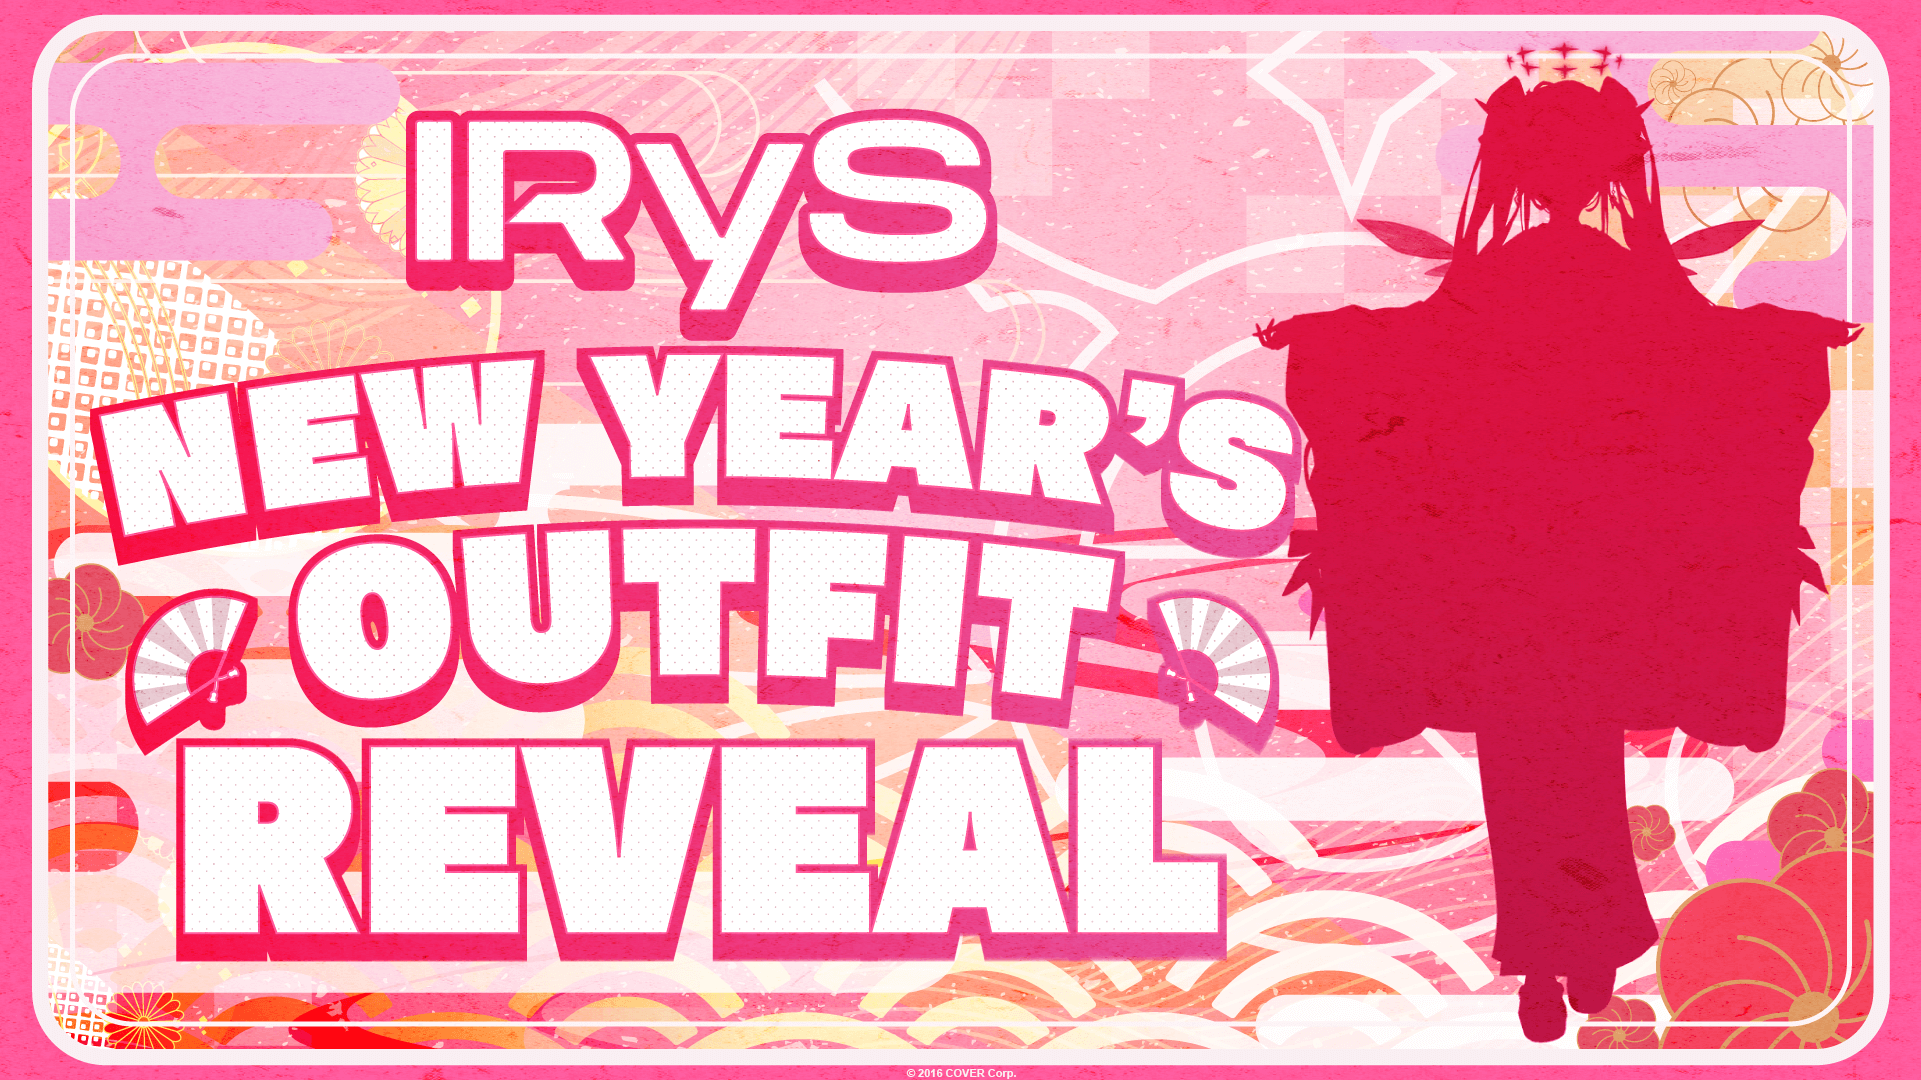 IRyS from hololive English to Reveal New Year's Outfit | NEWS | hololive  official website